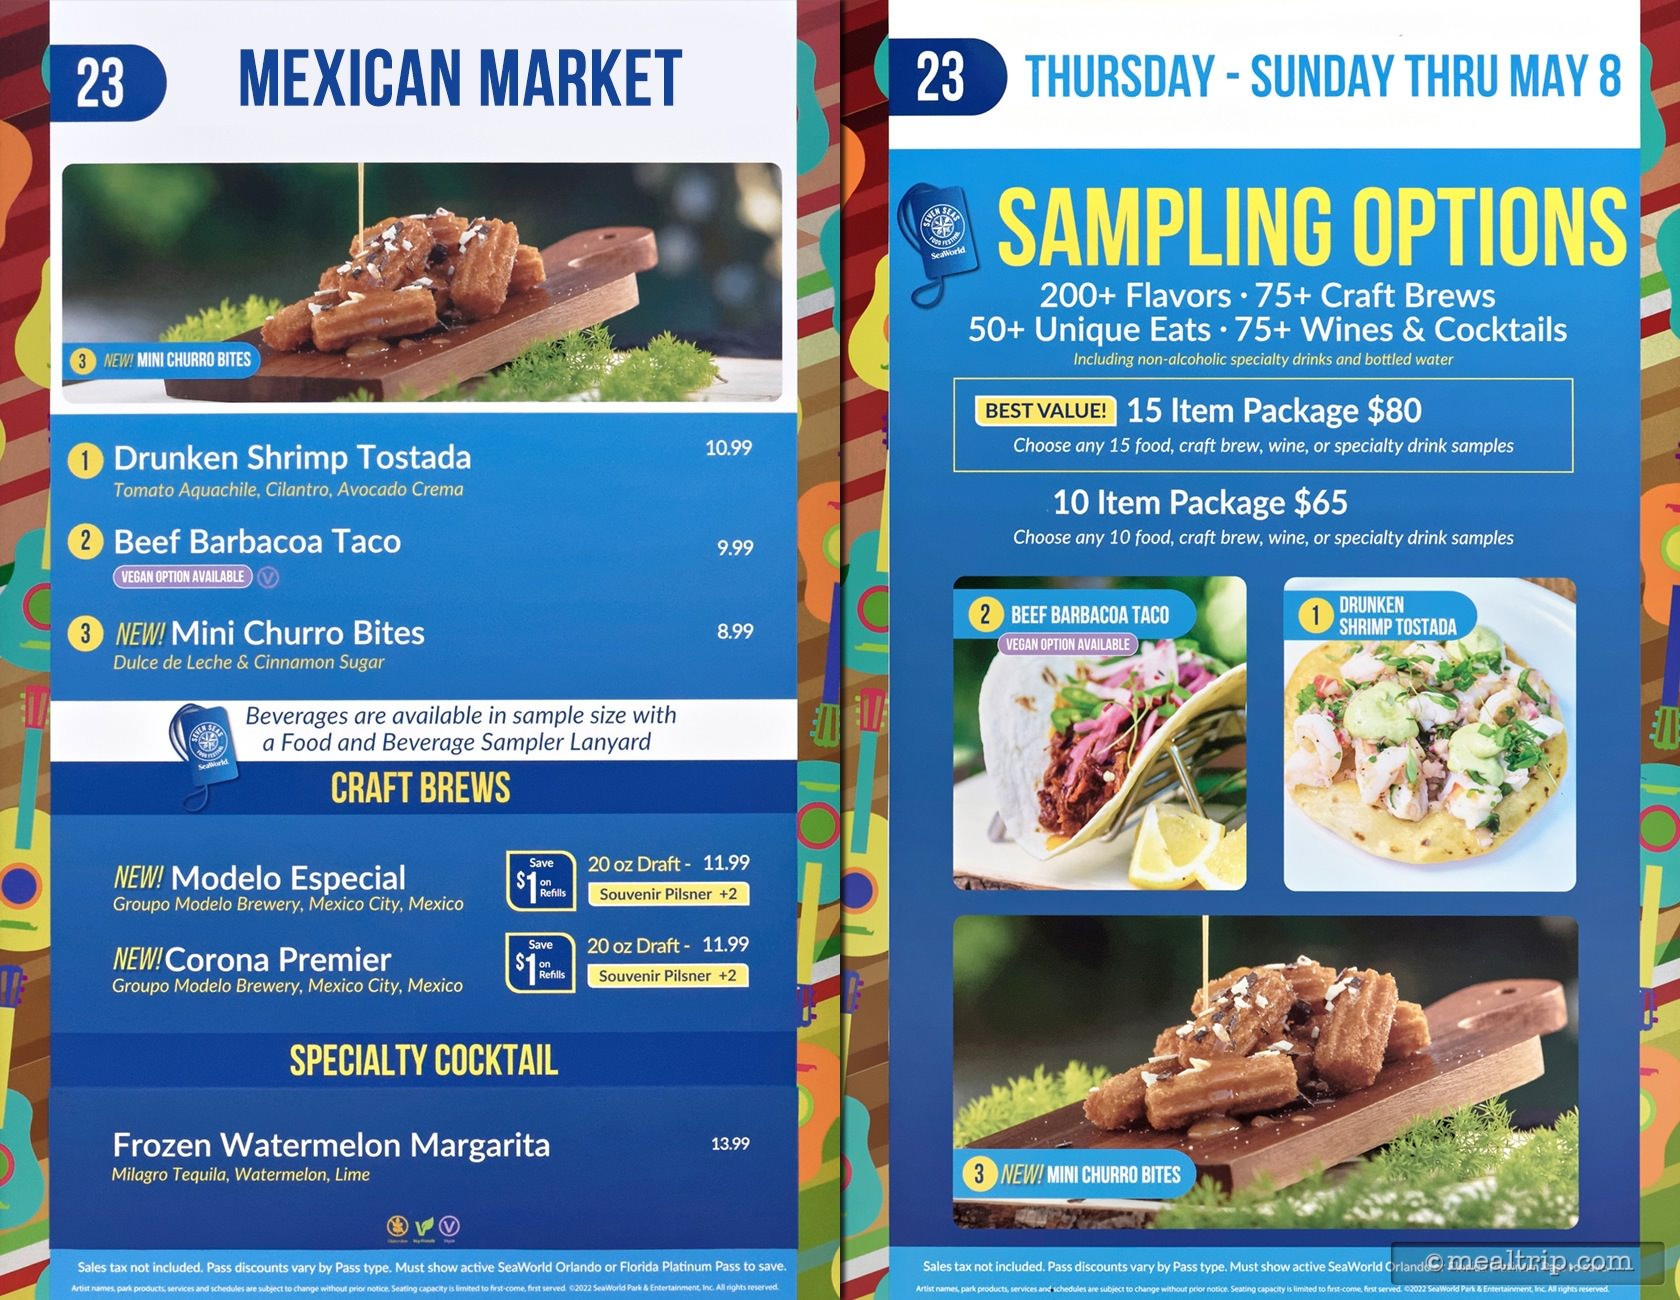 The Mexican Market Menu Boards with Prices